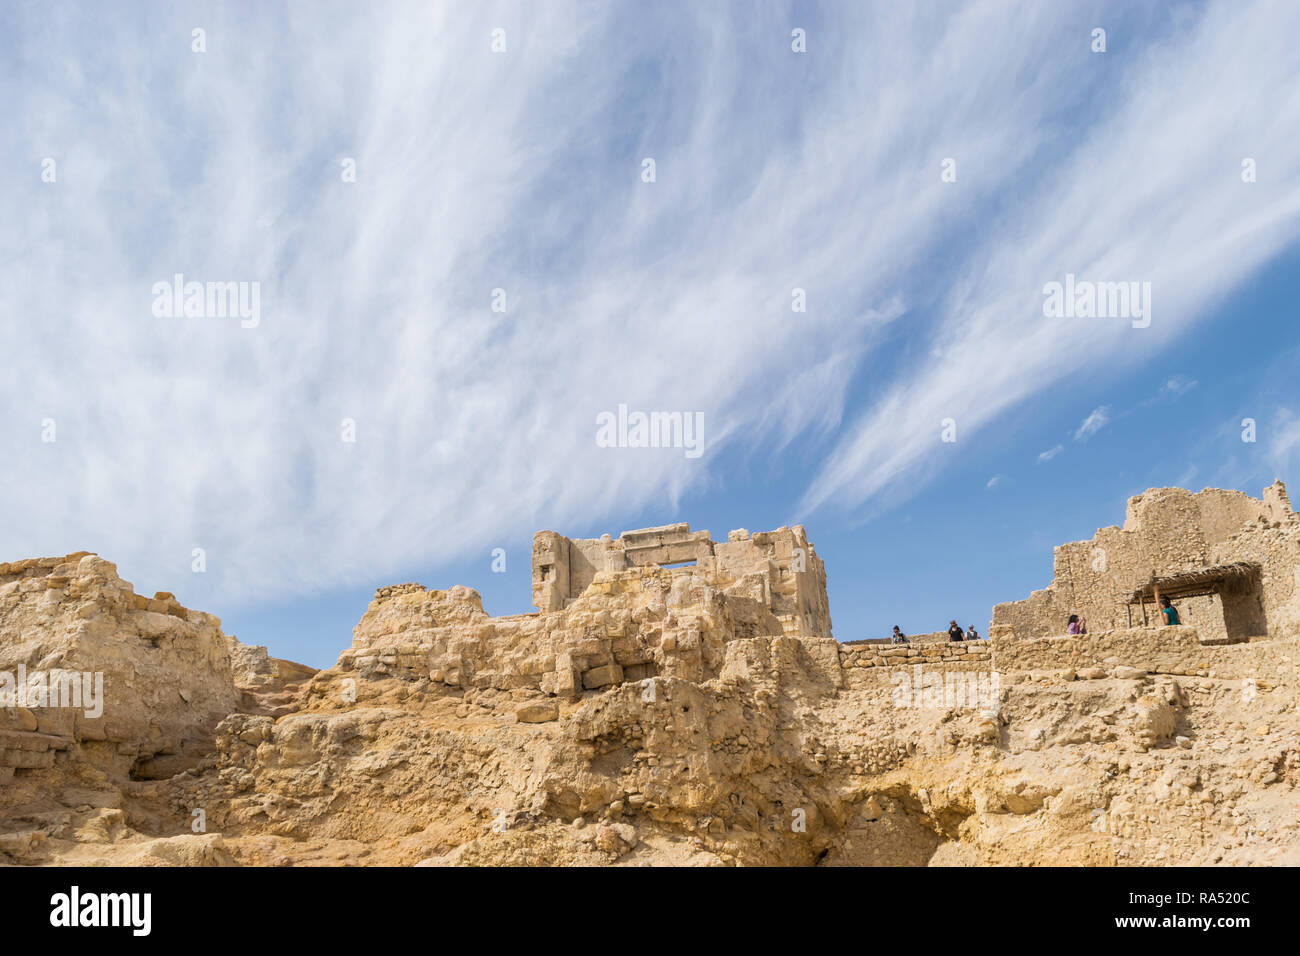 Temple of the Oracle of Amun in the old Town of Siwa oasis in Egypt Stock Photo